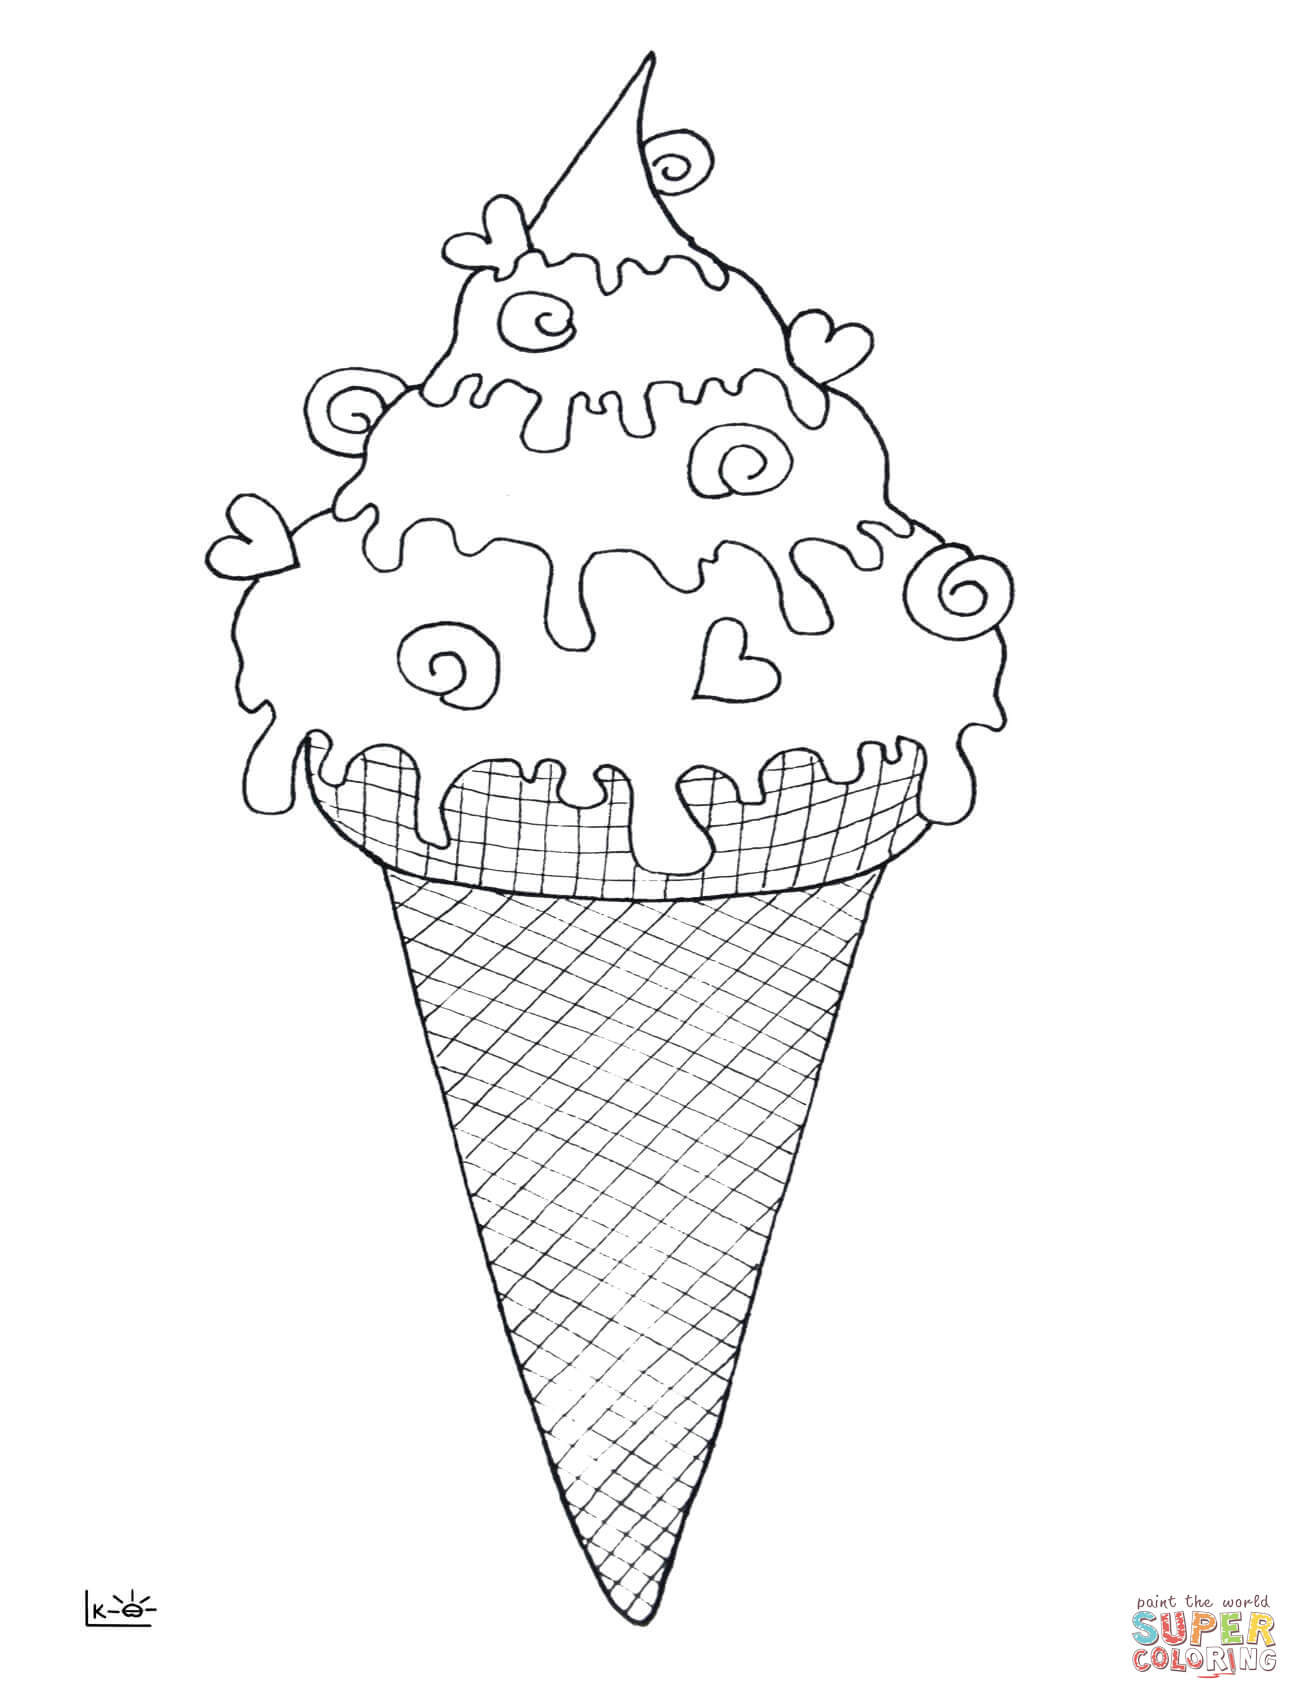 Icecream Cone Coloring Pages
 Ice Cream Cone coloring page